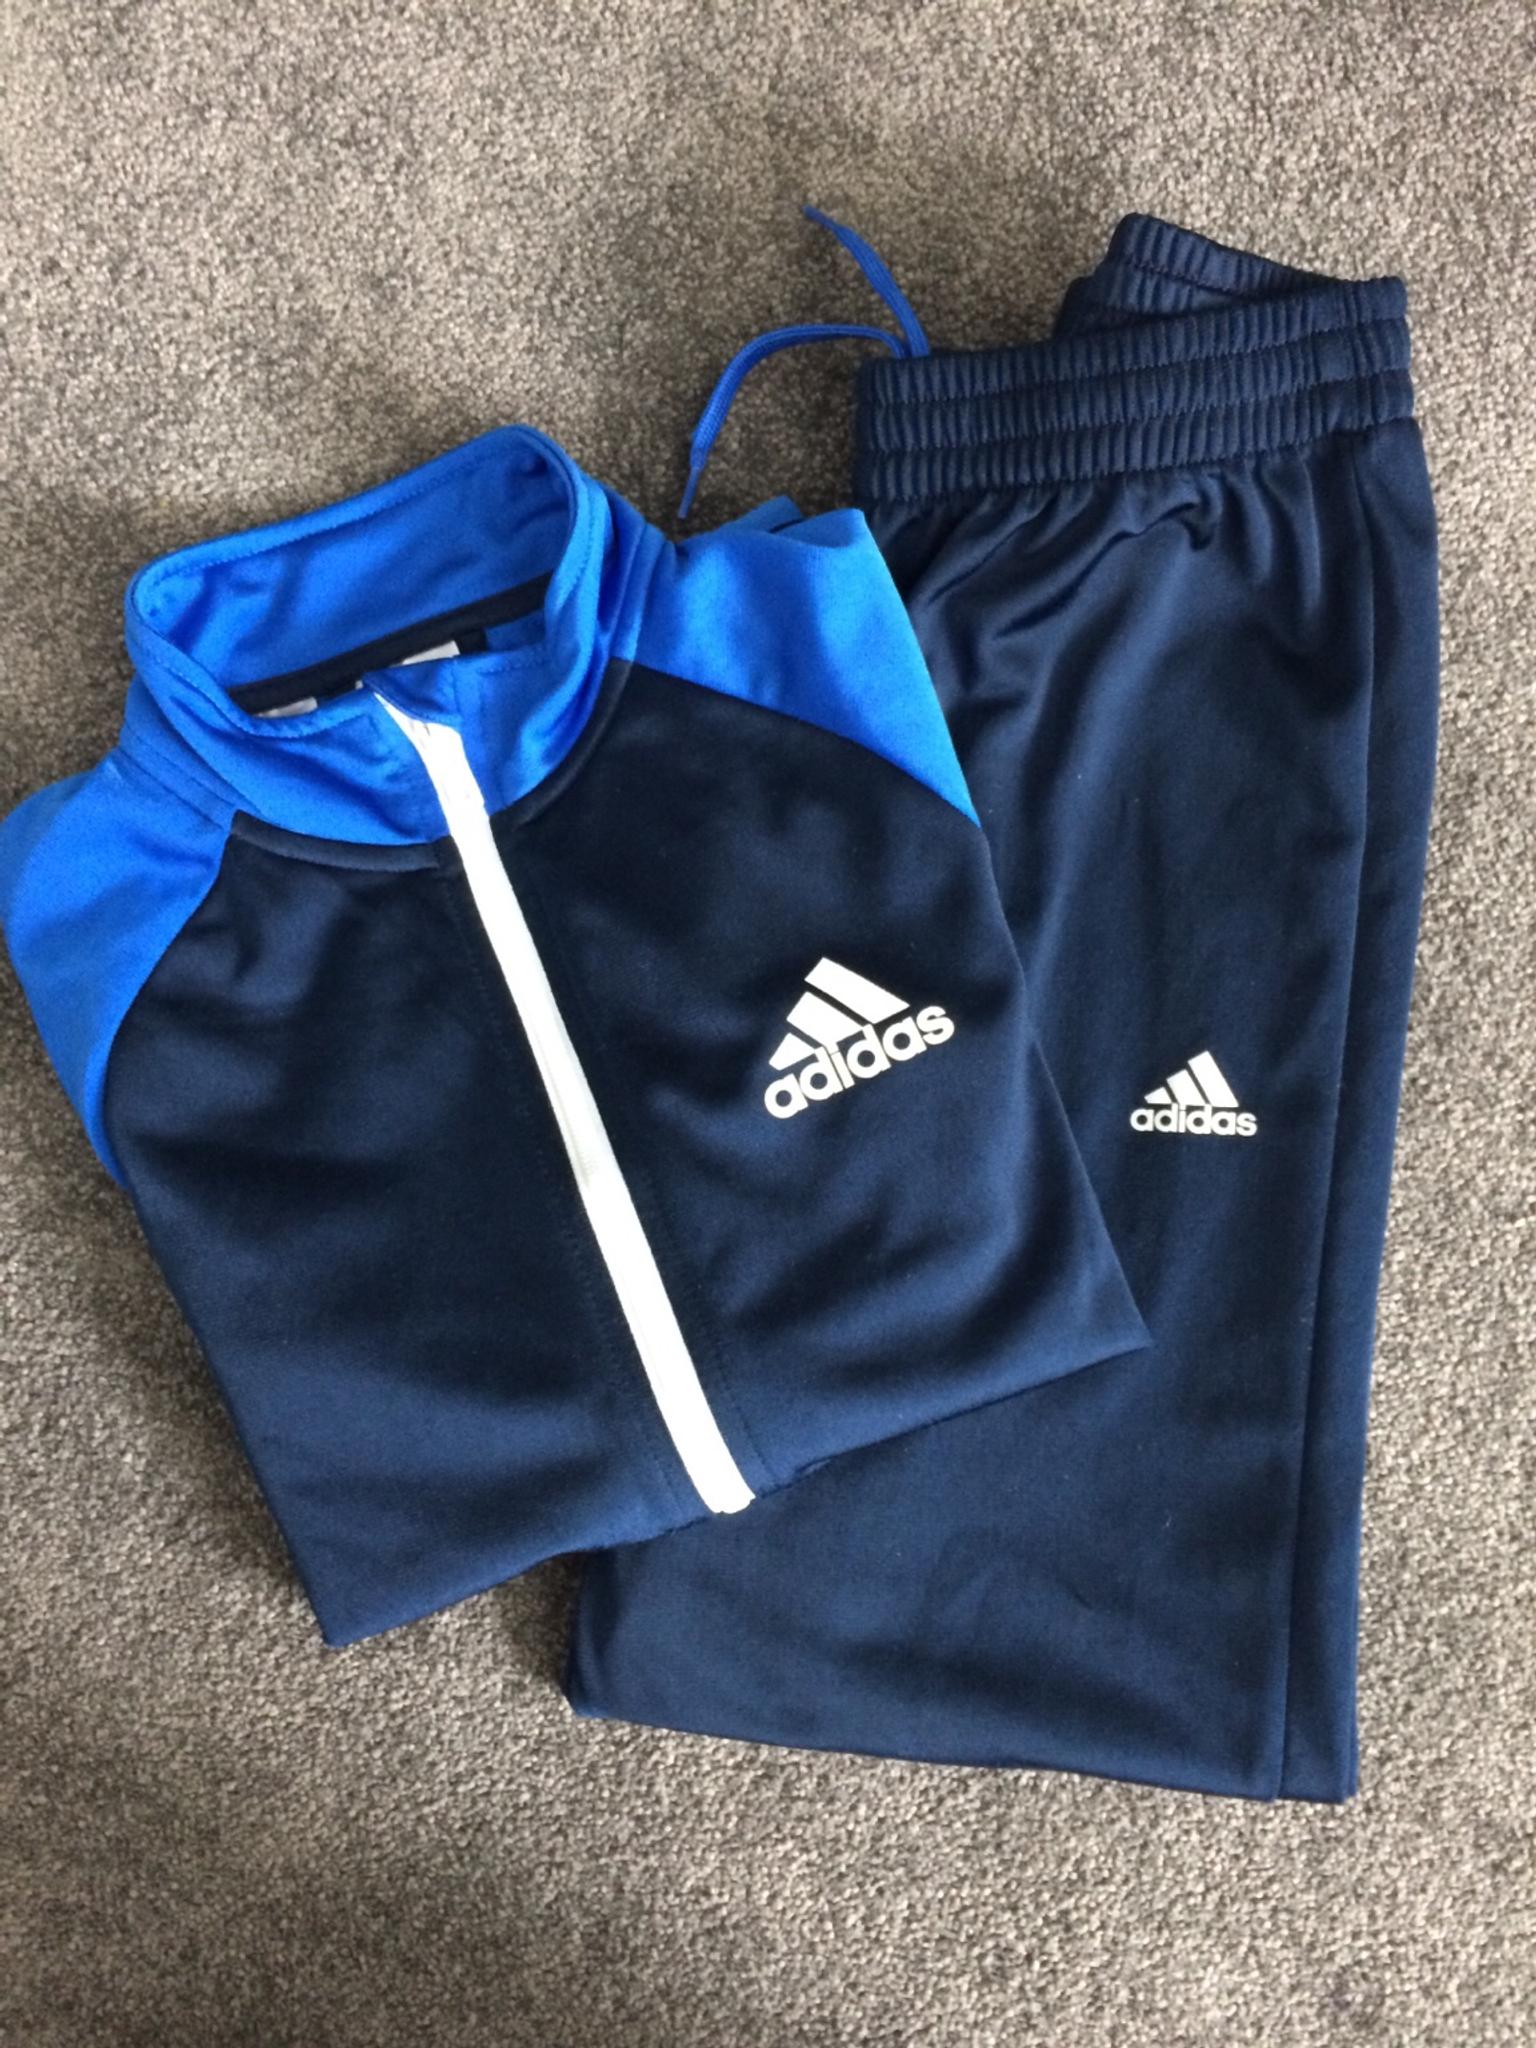 Boys age 9/10 Adidas Tracksuit navy in 